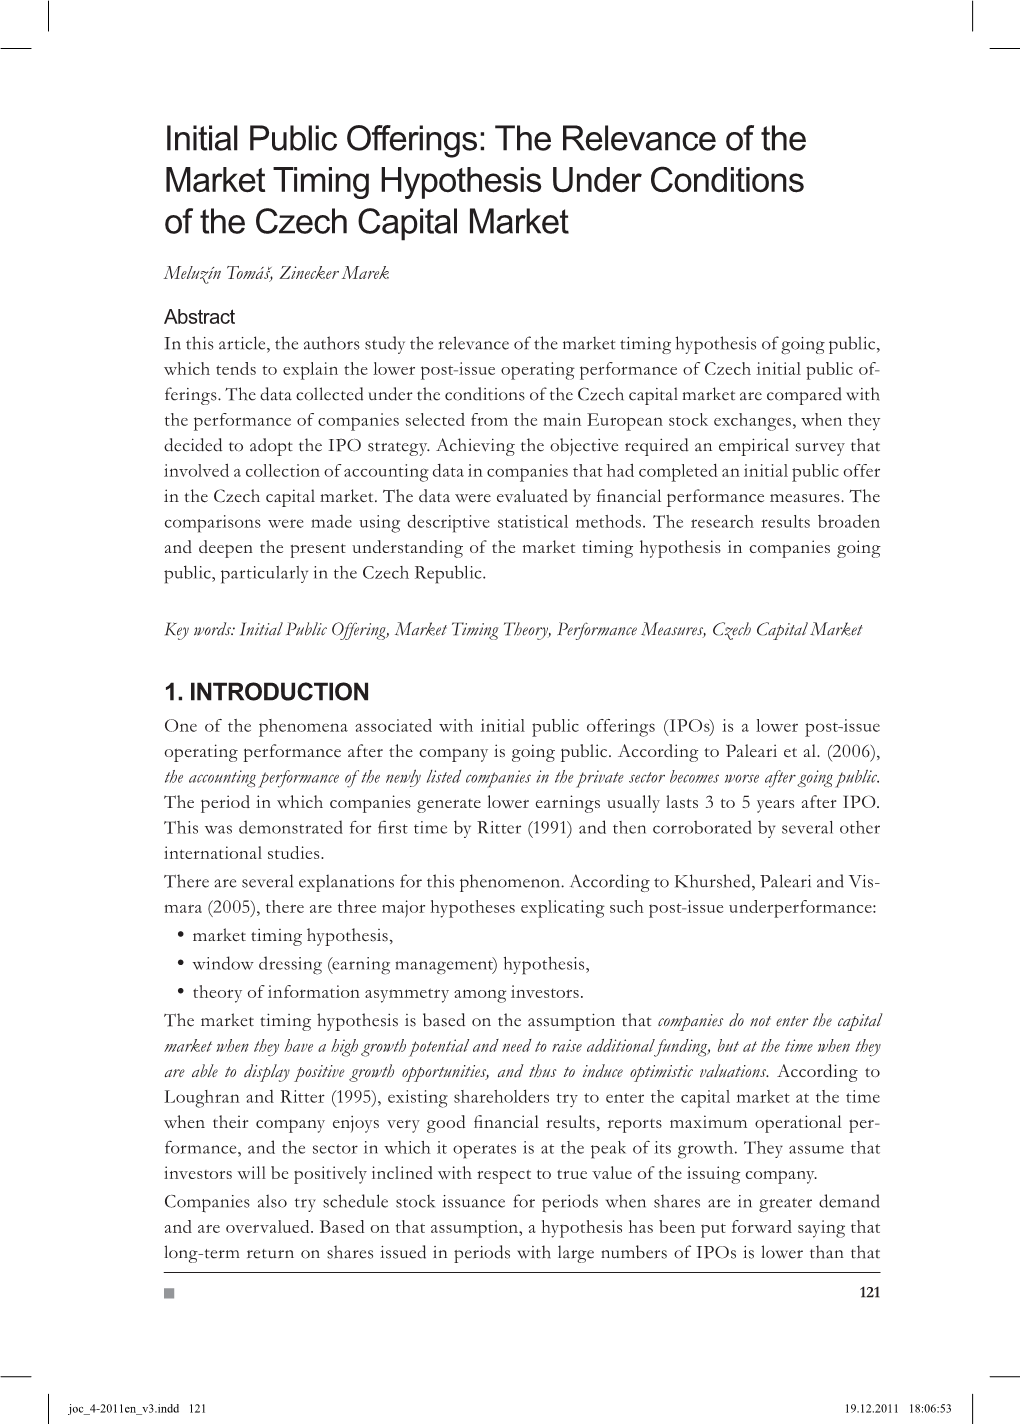 Initial Public Offerings: the Relevance of the Market Timing Hypothesis Under Conditions of the Czech Capital Market